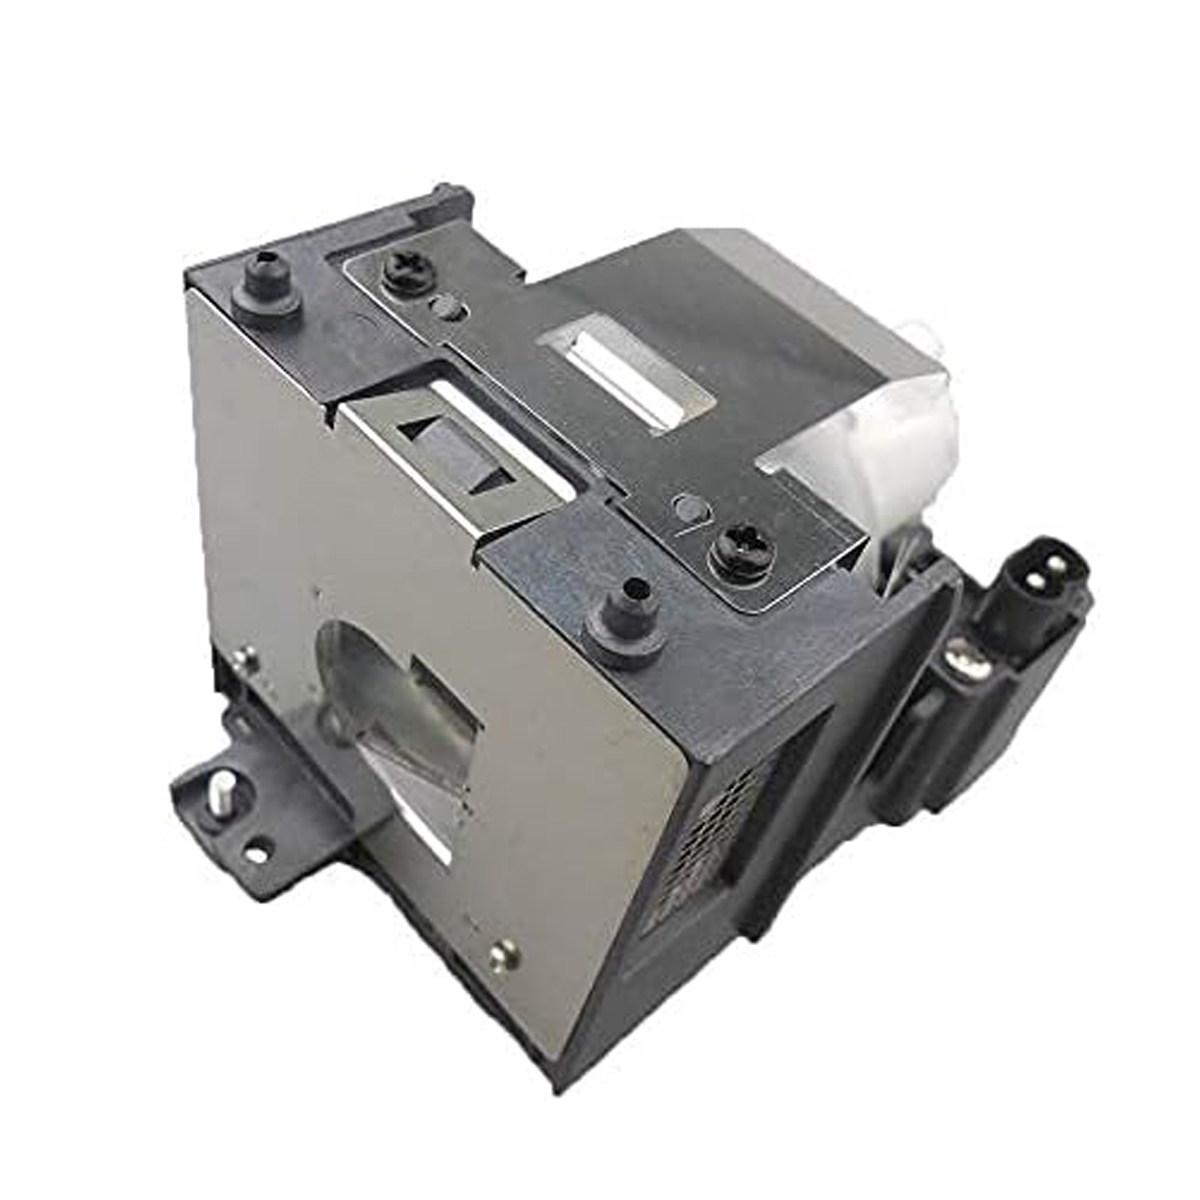 Replacement Projector lamp AN-XR20L2 For SHARP PG-MB56X PG-MB55 PG-MB56